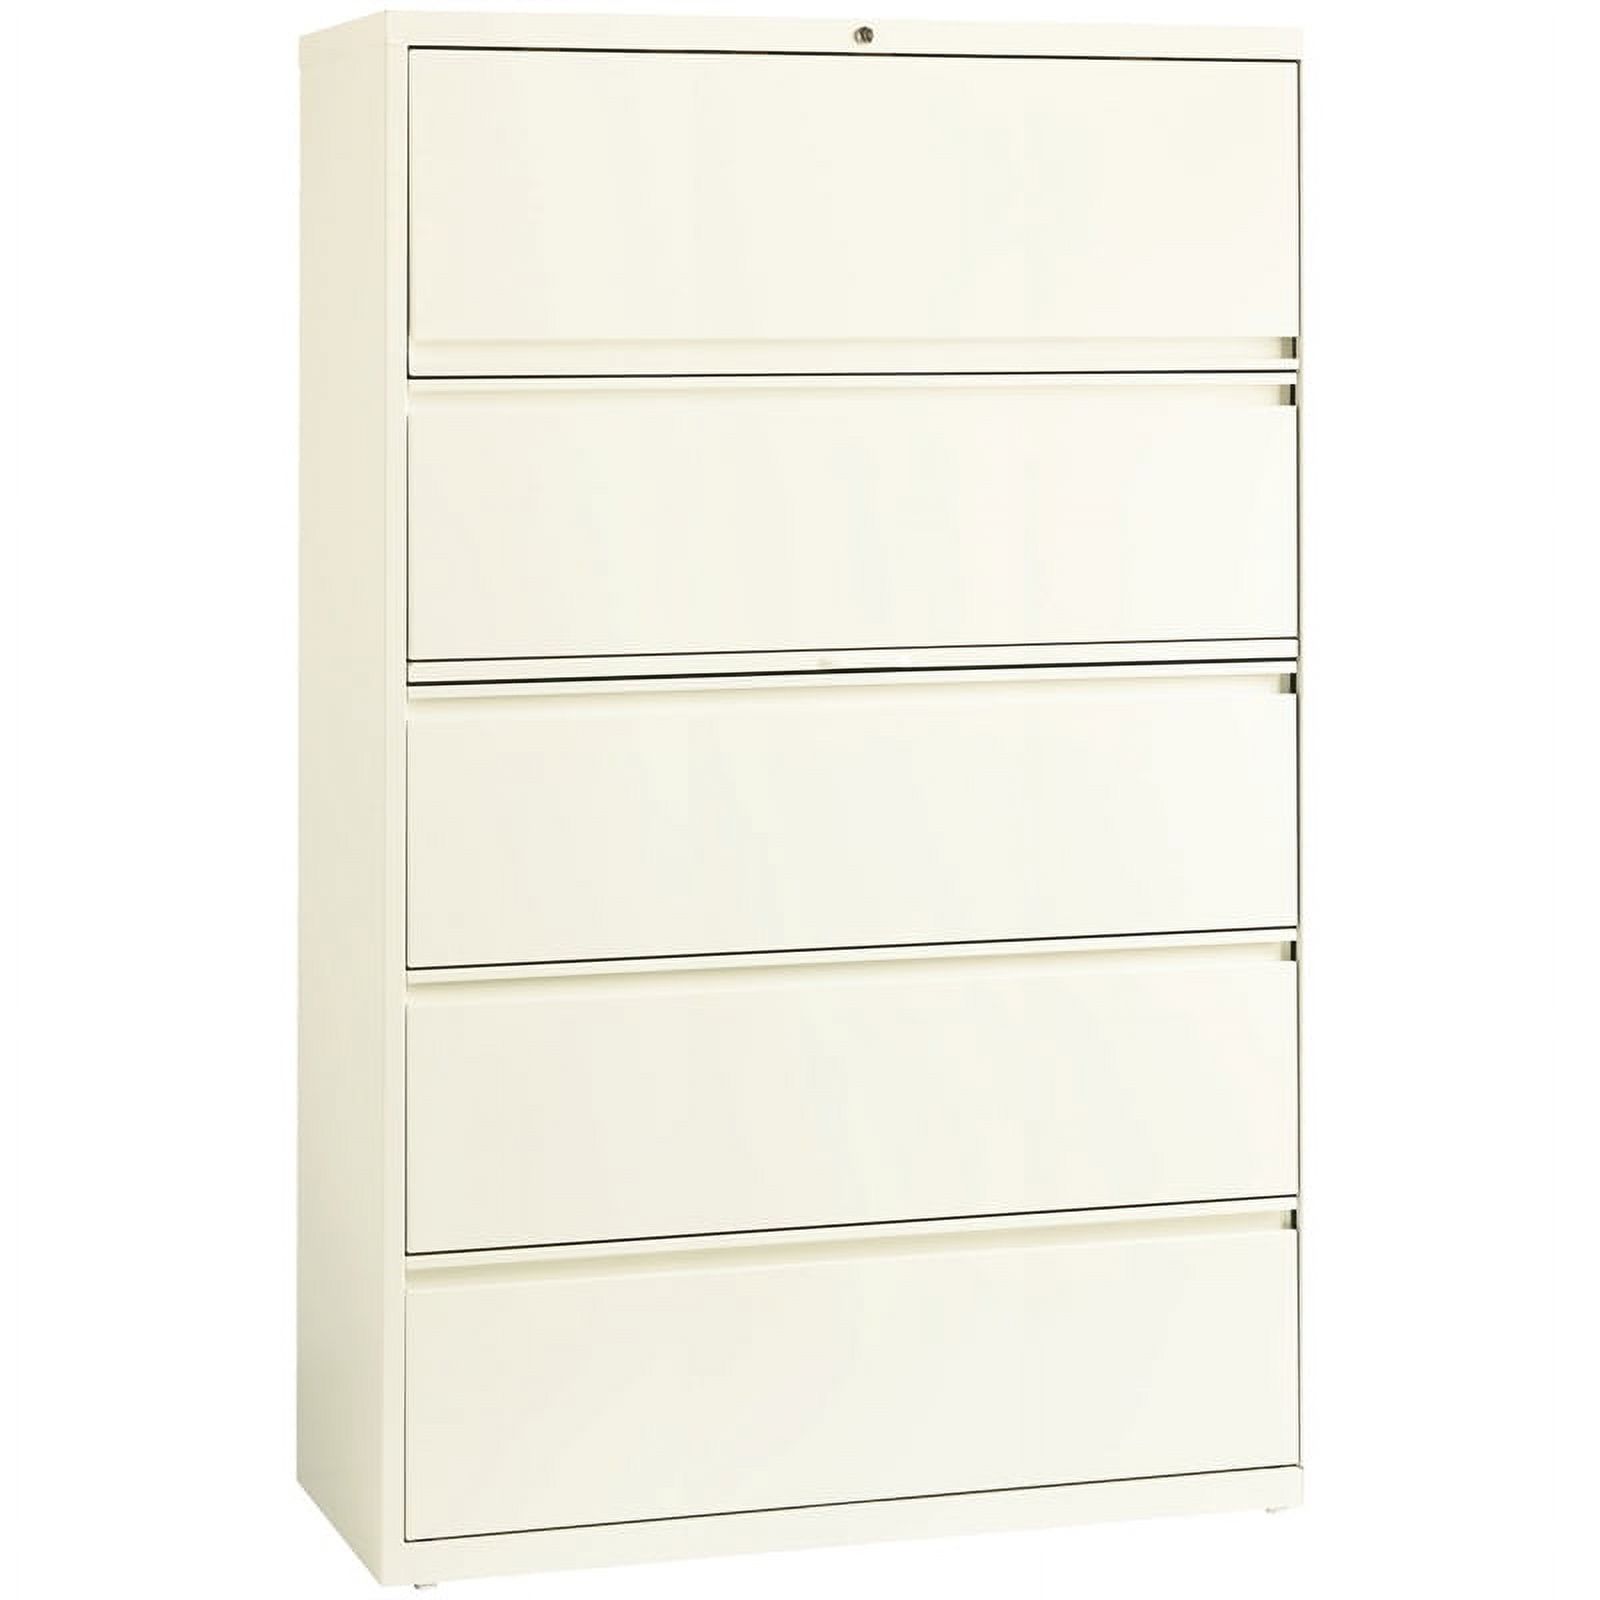 Scranton & Co 42" 5-Drawer Contemporary Metal Lateral File Cabinet in Off White - image 1 of 5